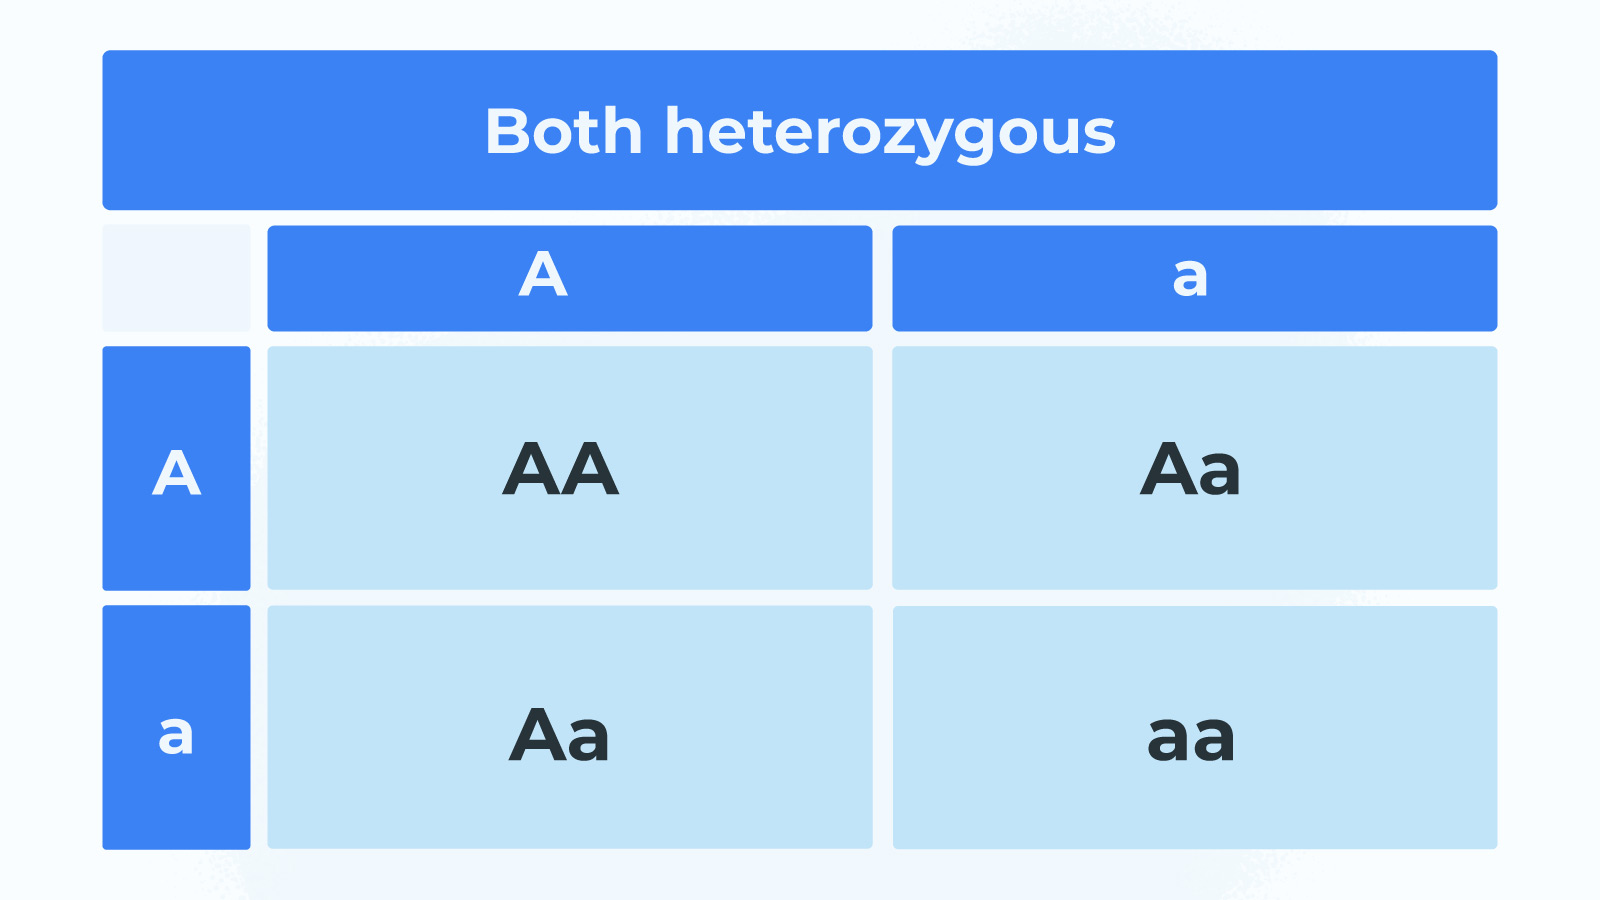 Two parents with heterozygous alleles (both dominant and recessive)